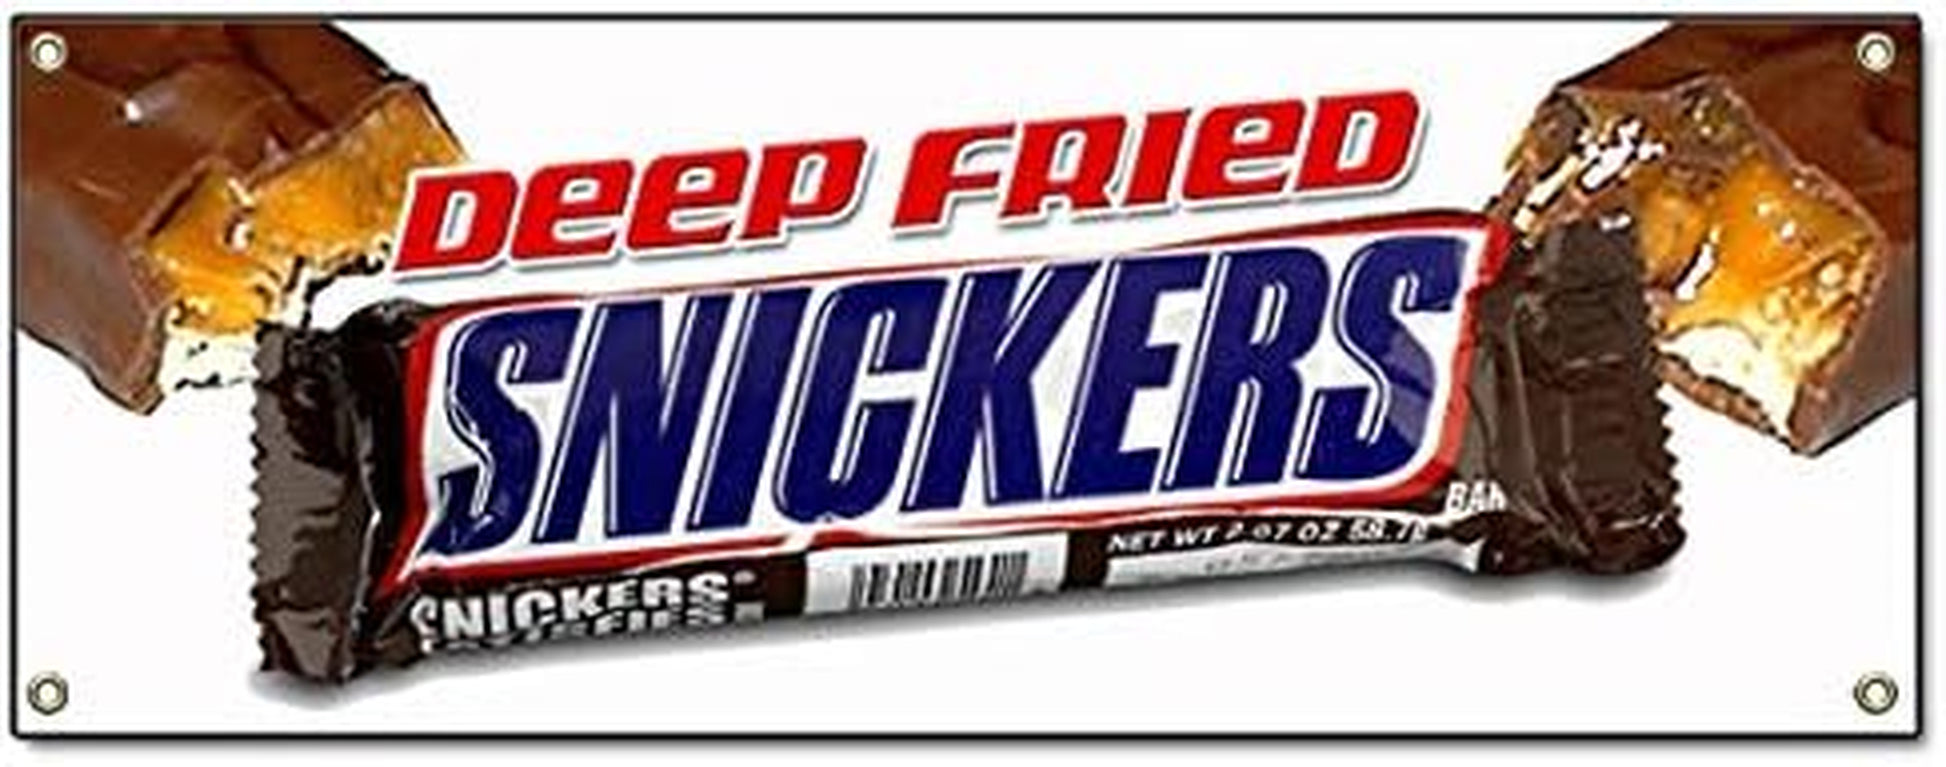 DEEP Fried Snickers Banner Sign Warm Fresh Candy Bar Fryed Stick Candybars